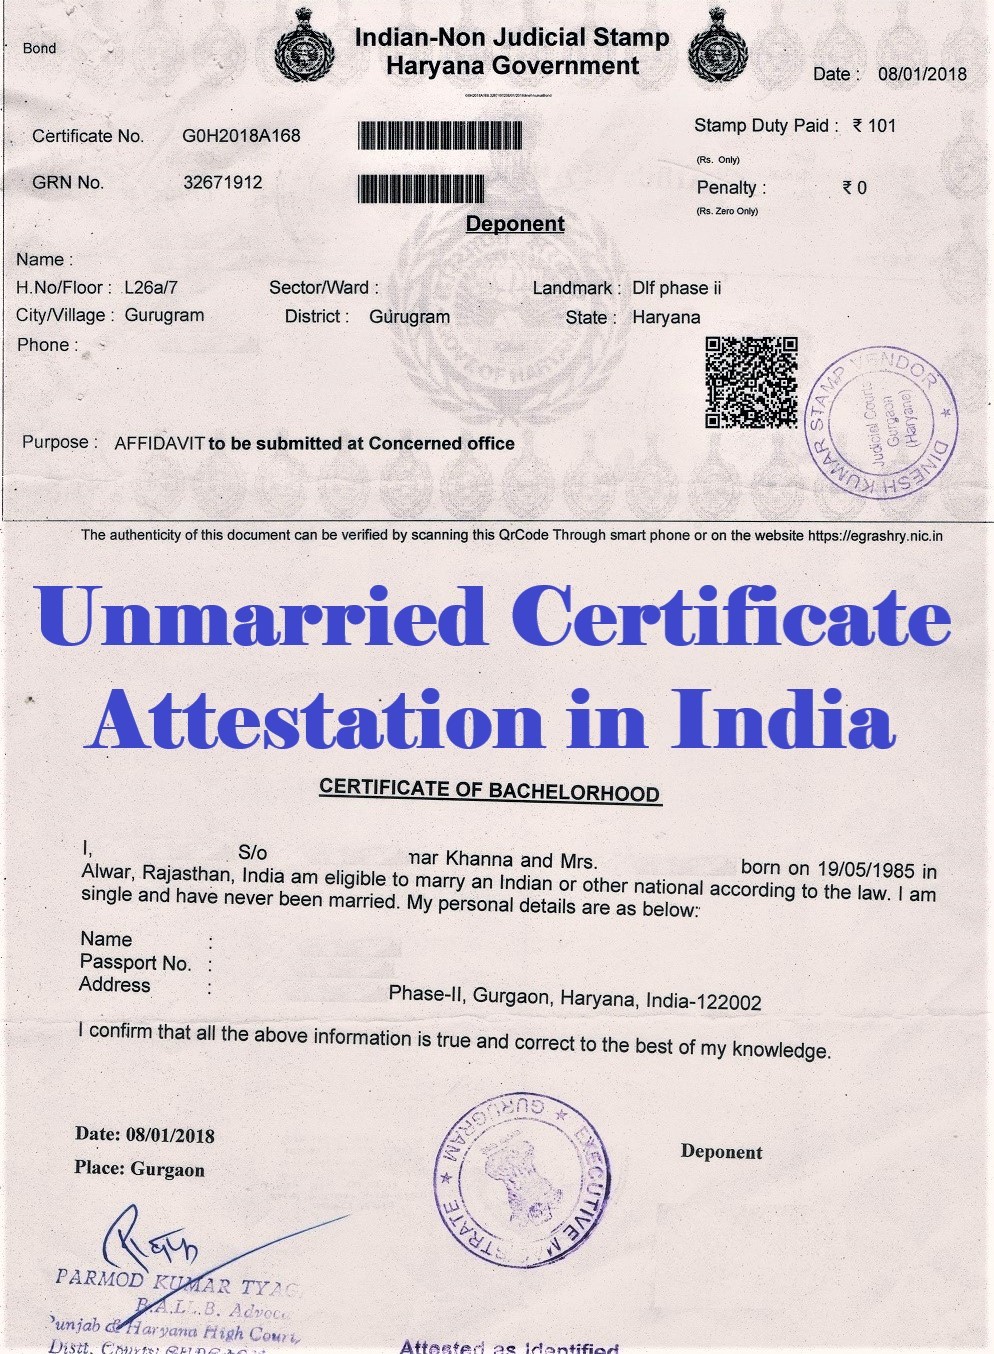 Unmarried Certificate Attestation from Burma Embassy